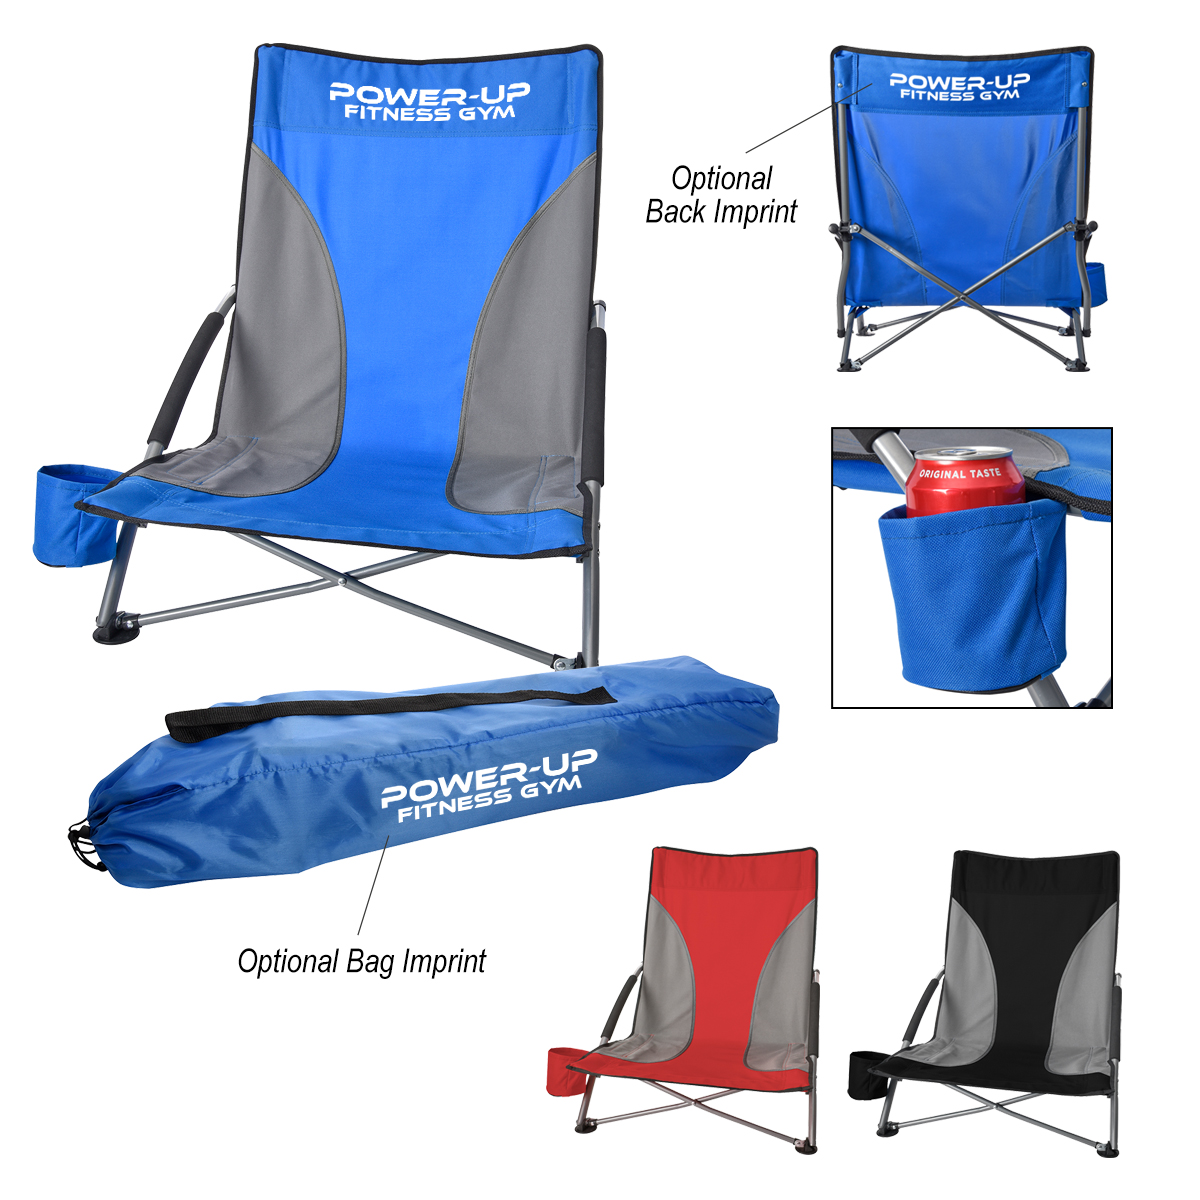 Low Profile Chair with Carrying Bag - Show Your Logo